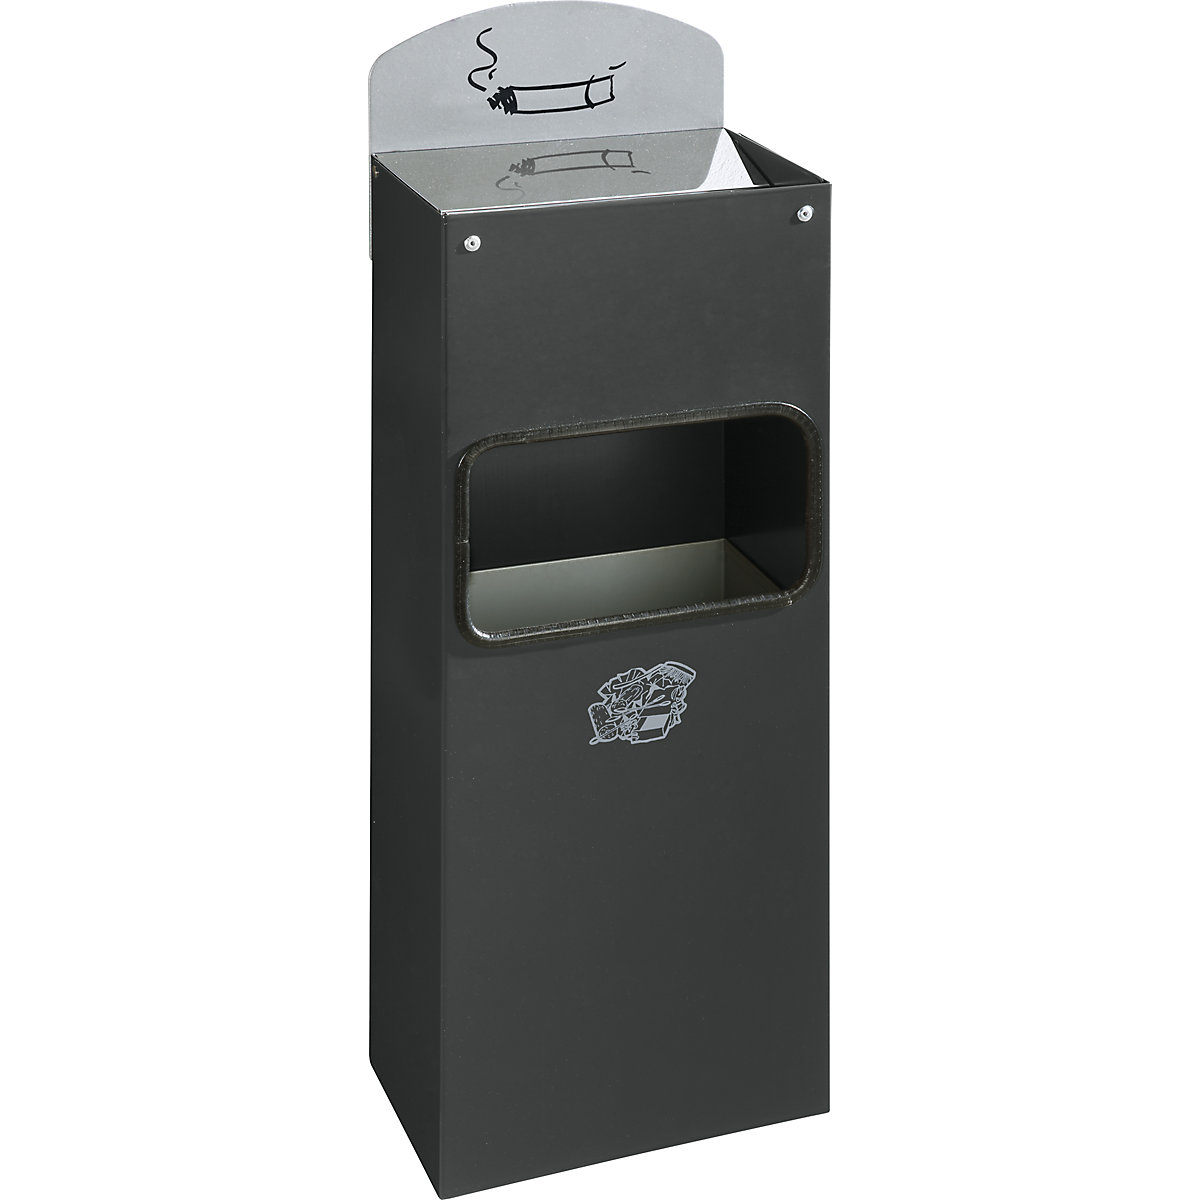 Combination wall ashtray with waste disposal - VAR